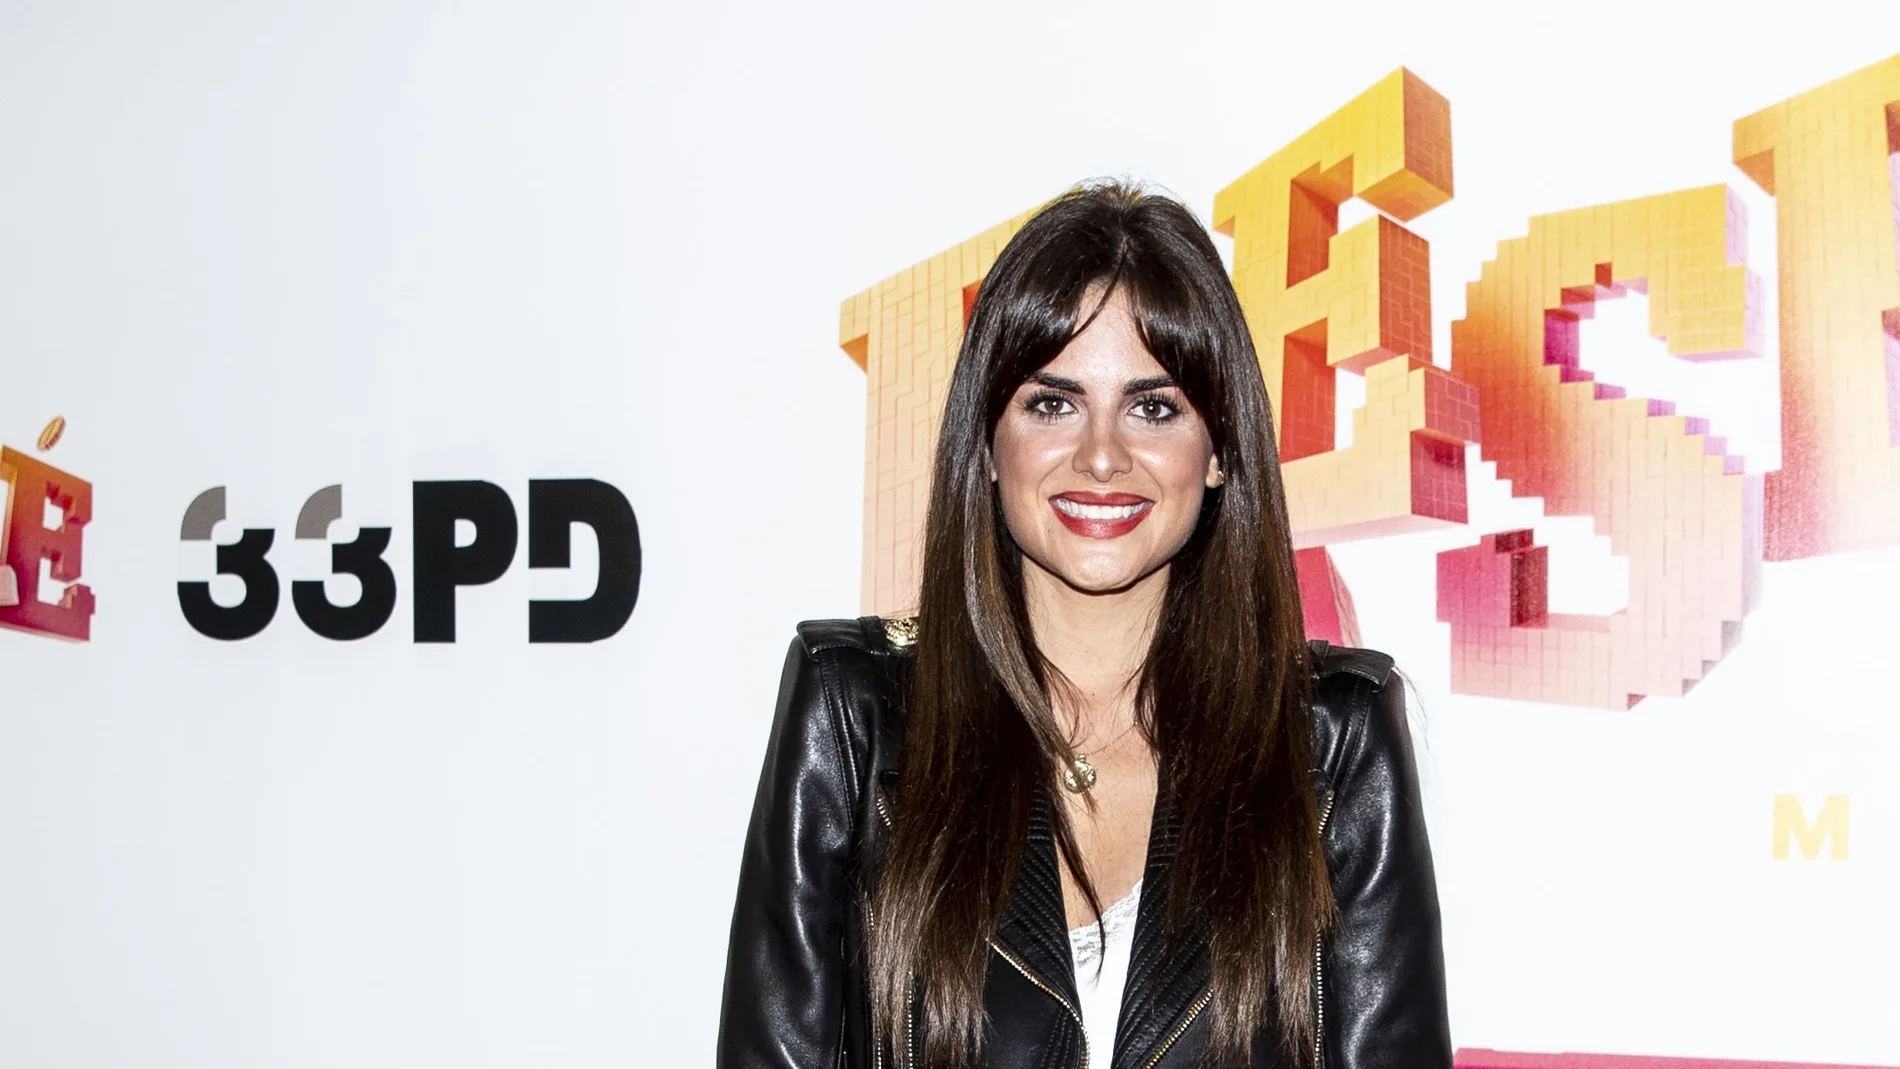 Alexia Rivas at photocall for premiere musical Resistire in Madrid.